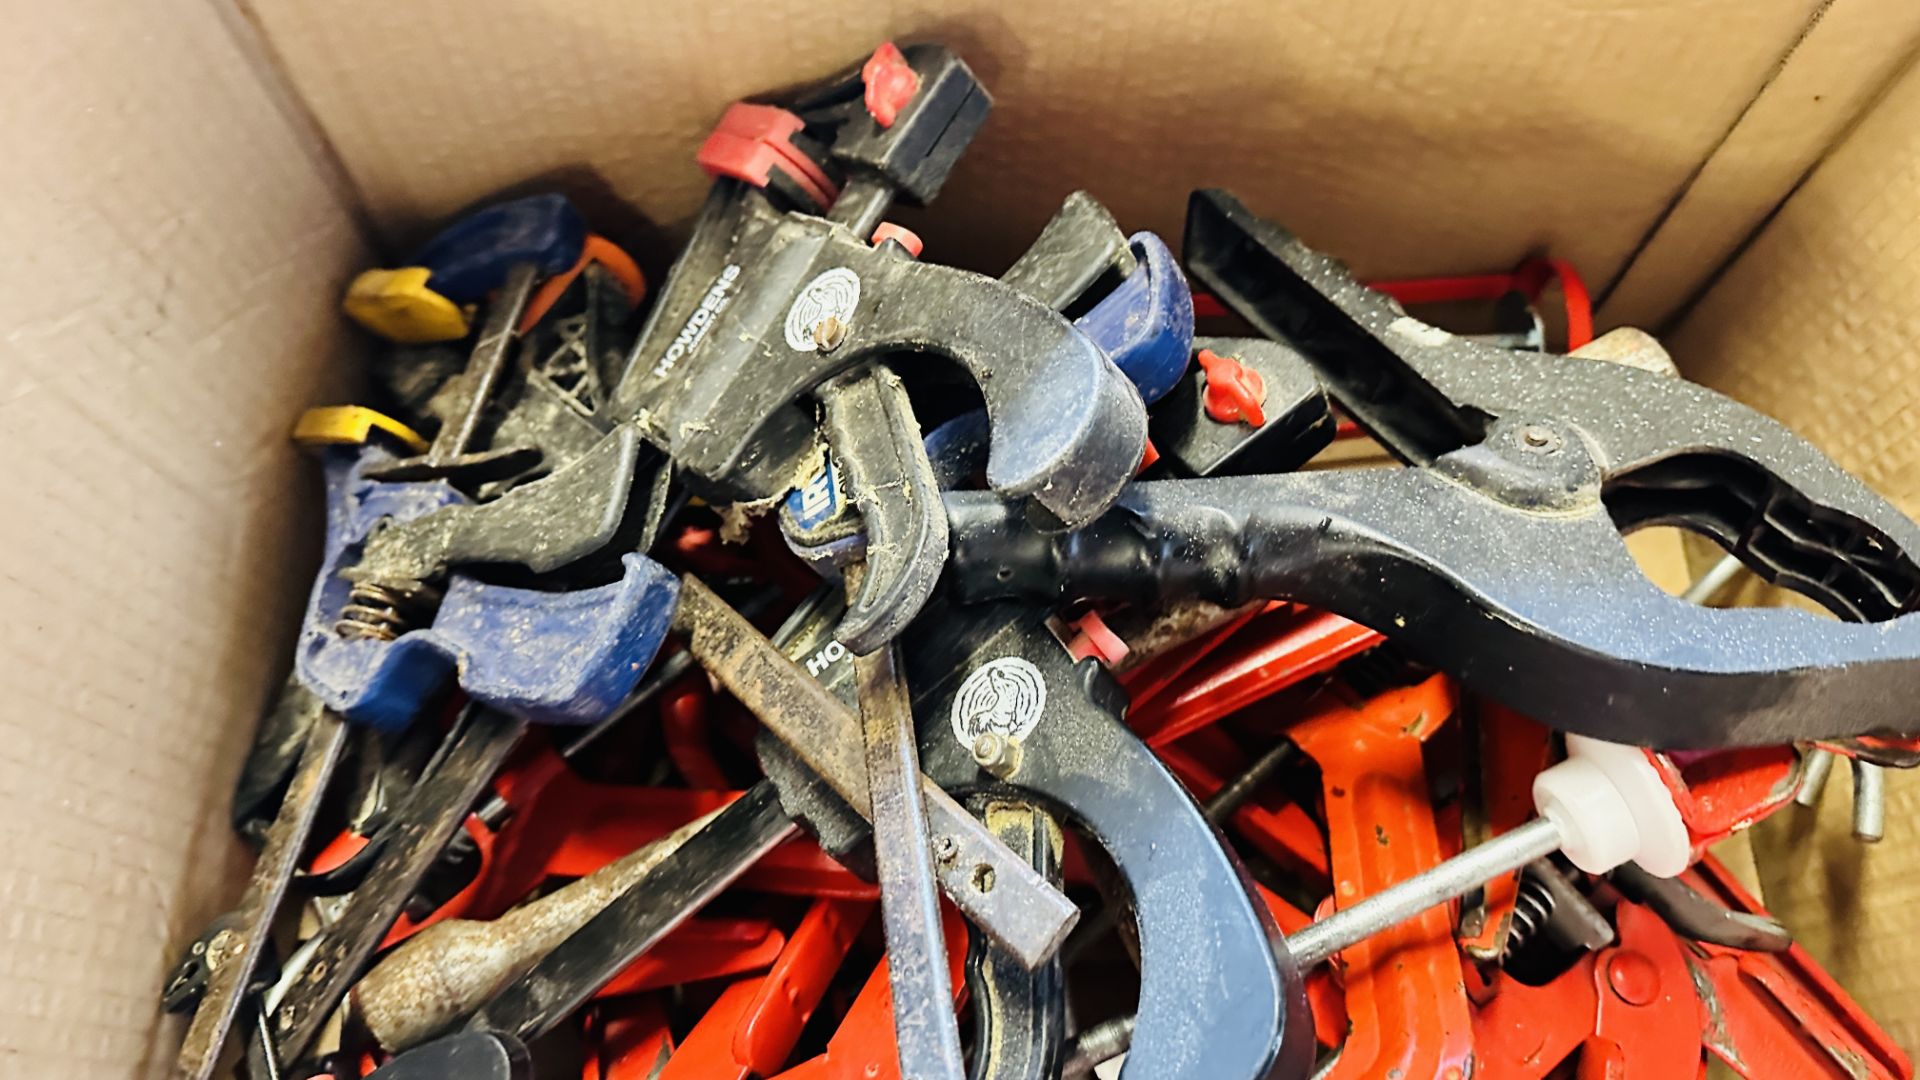 A BOX CONTAINING 11 SPEED CLAMPS, 3 MASTIC GUNS & VARIOUS OTHER SPEED CLAMPS. - Image 3 of 5